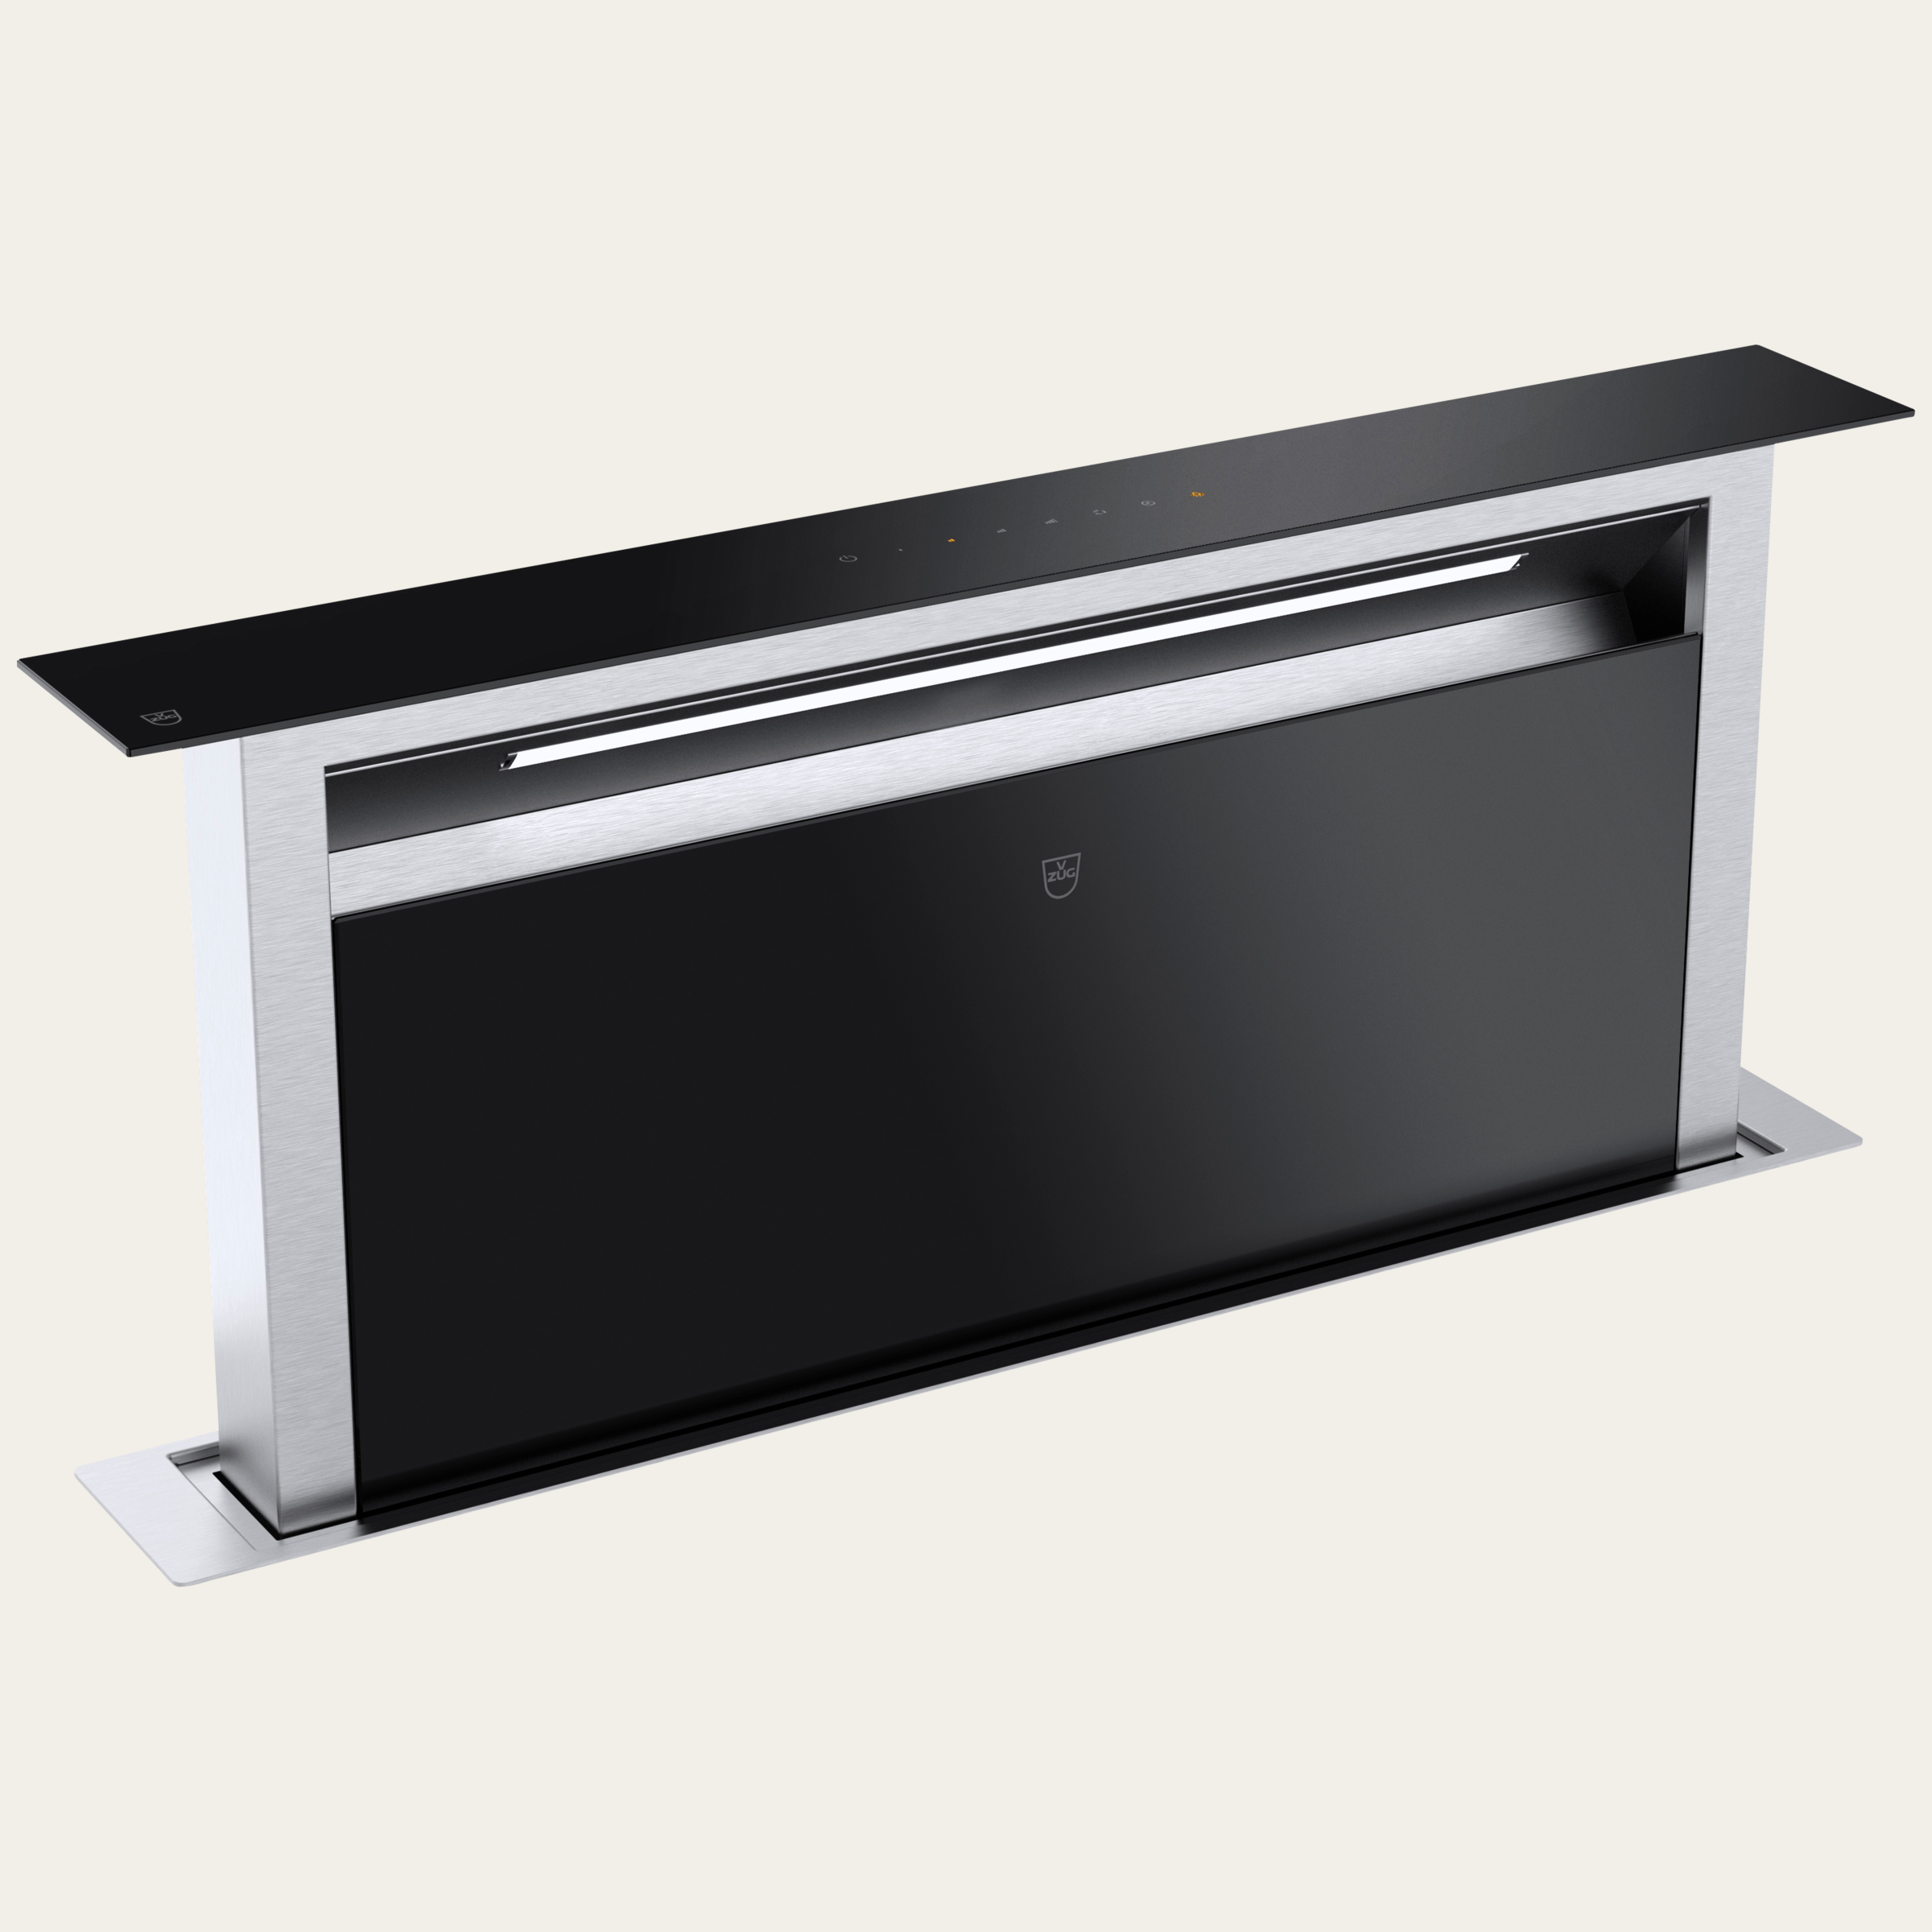 V-ZUG downdraft (DSTS9), W=90 cm, extracted air, glass design